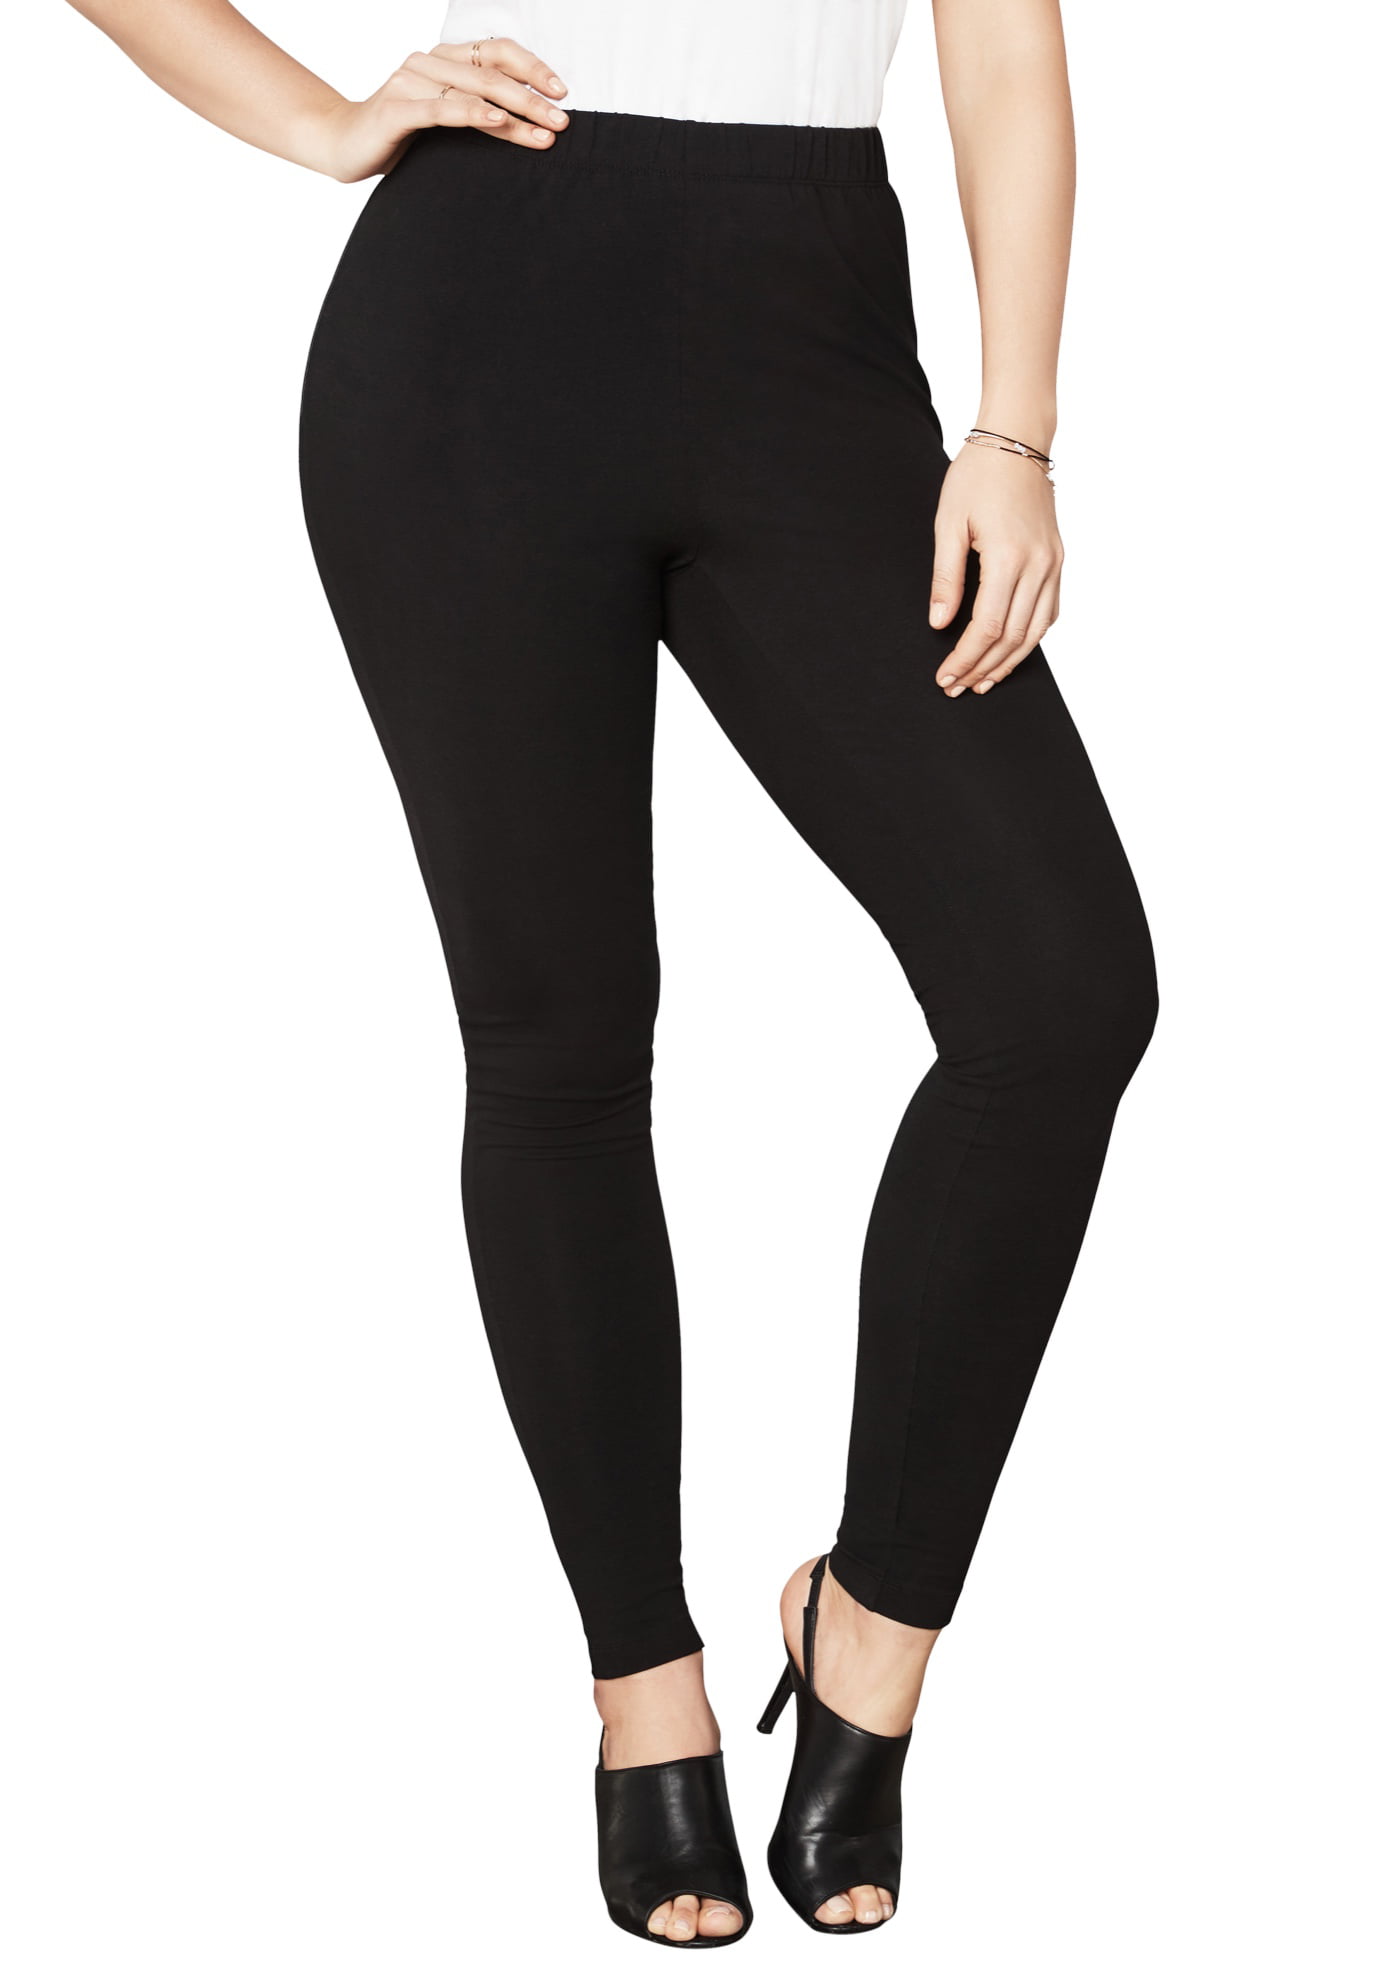 Leggings Clothing Brandsmart  International Society of Precision  Agriculture